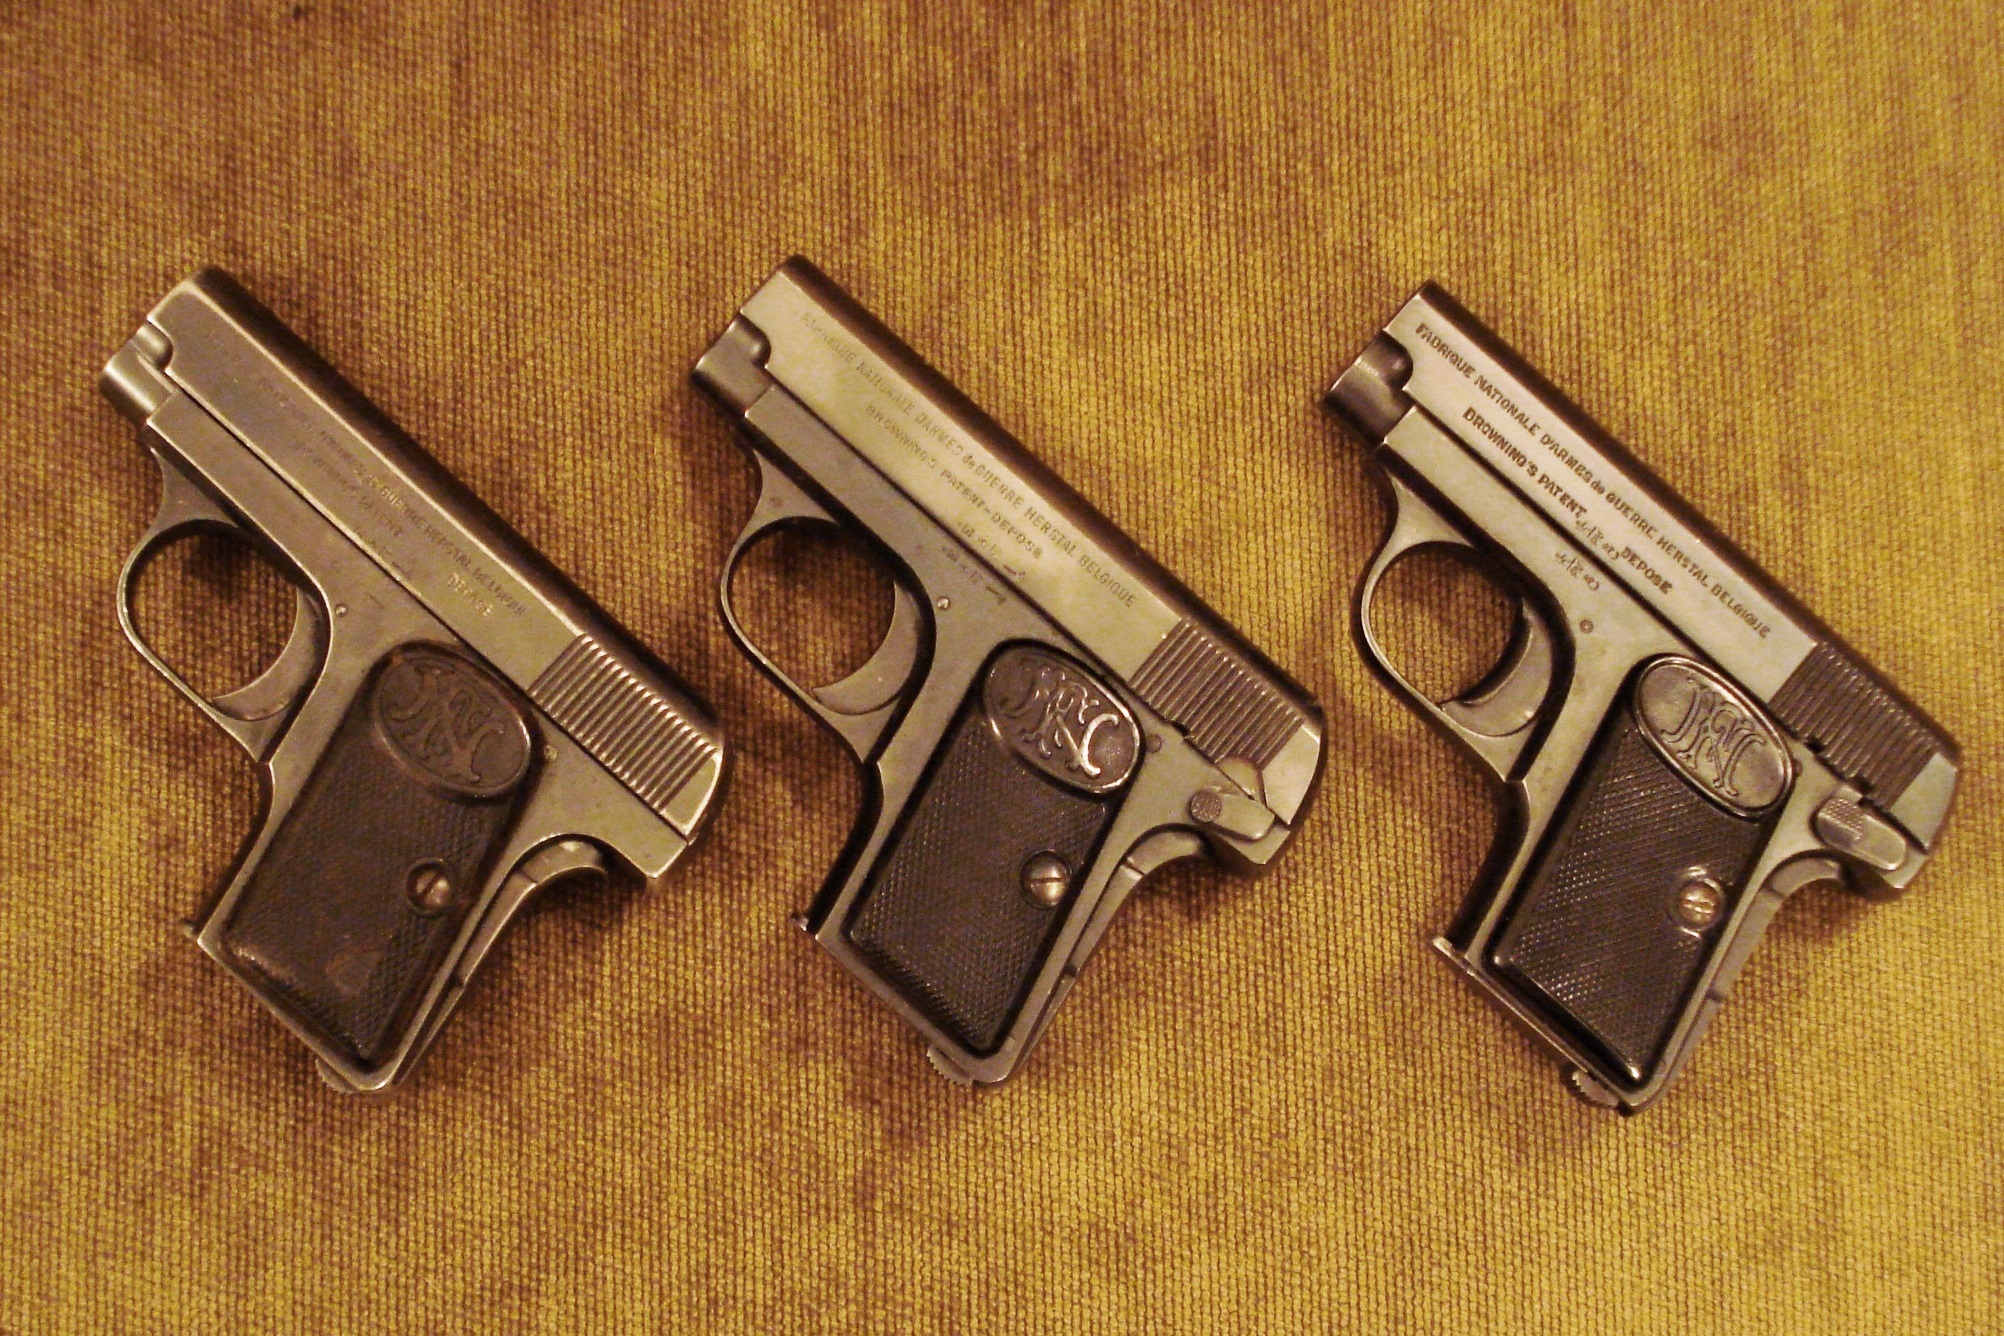 9mm pistols for competitive shooting